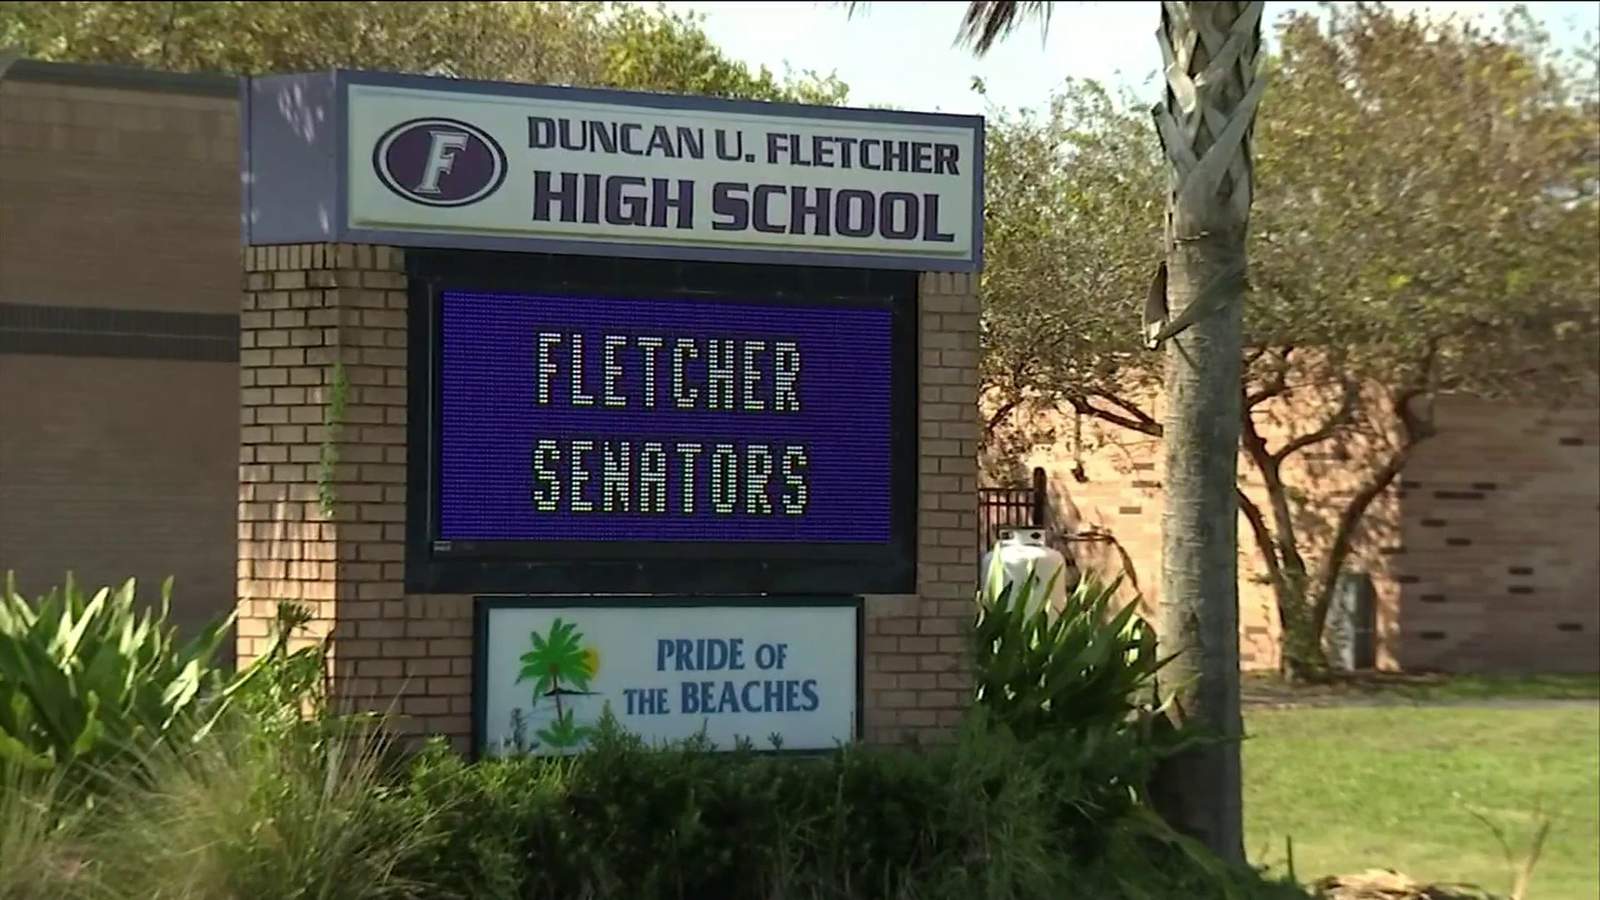 Fletcher High extends online learning after COVID-19 outbreak